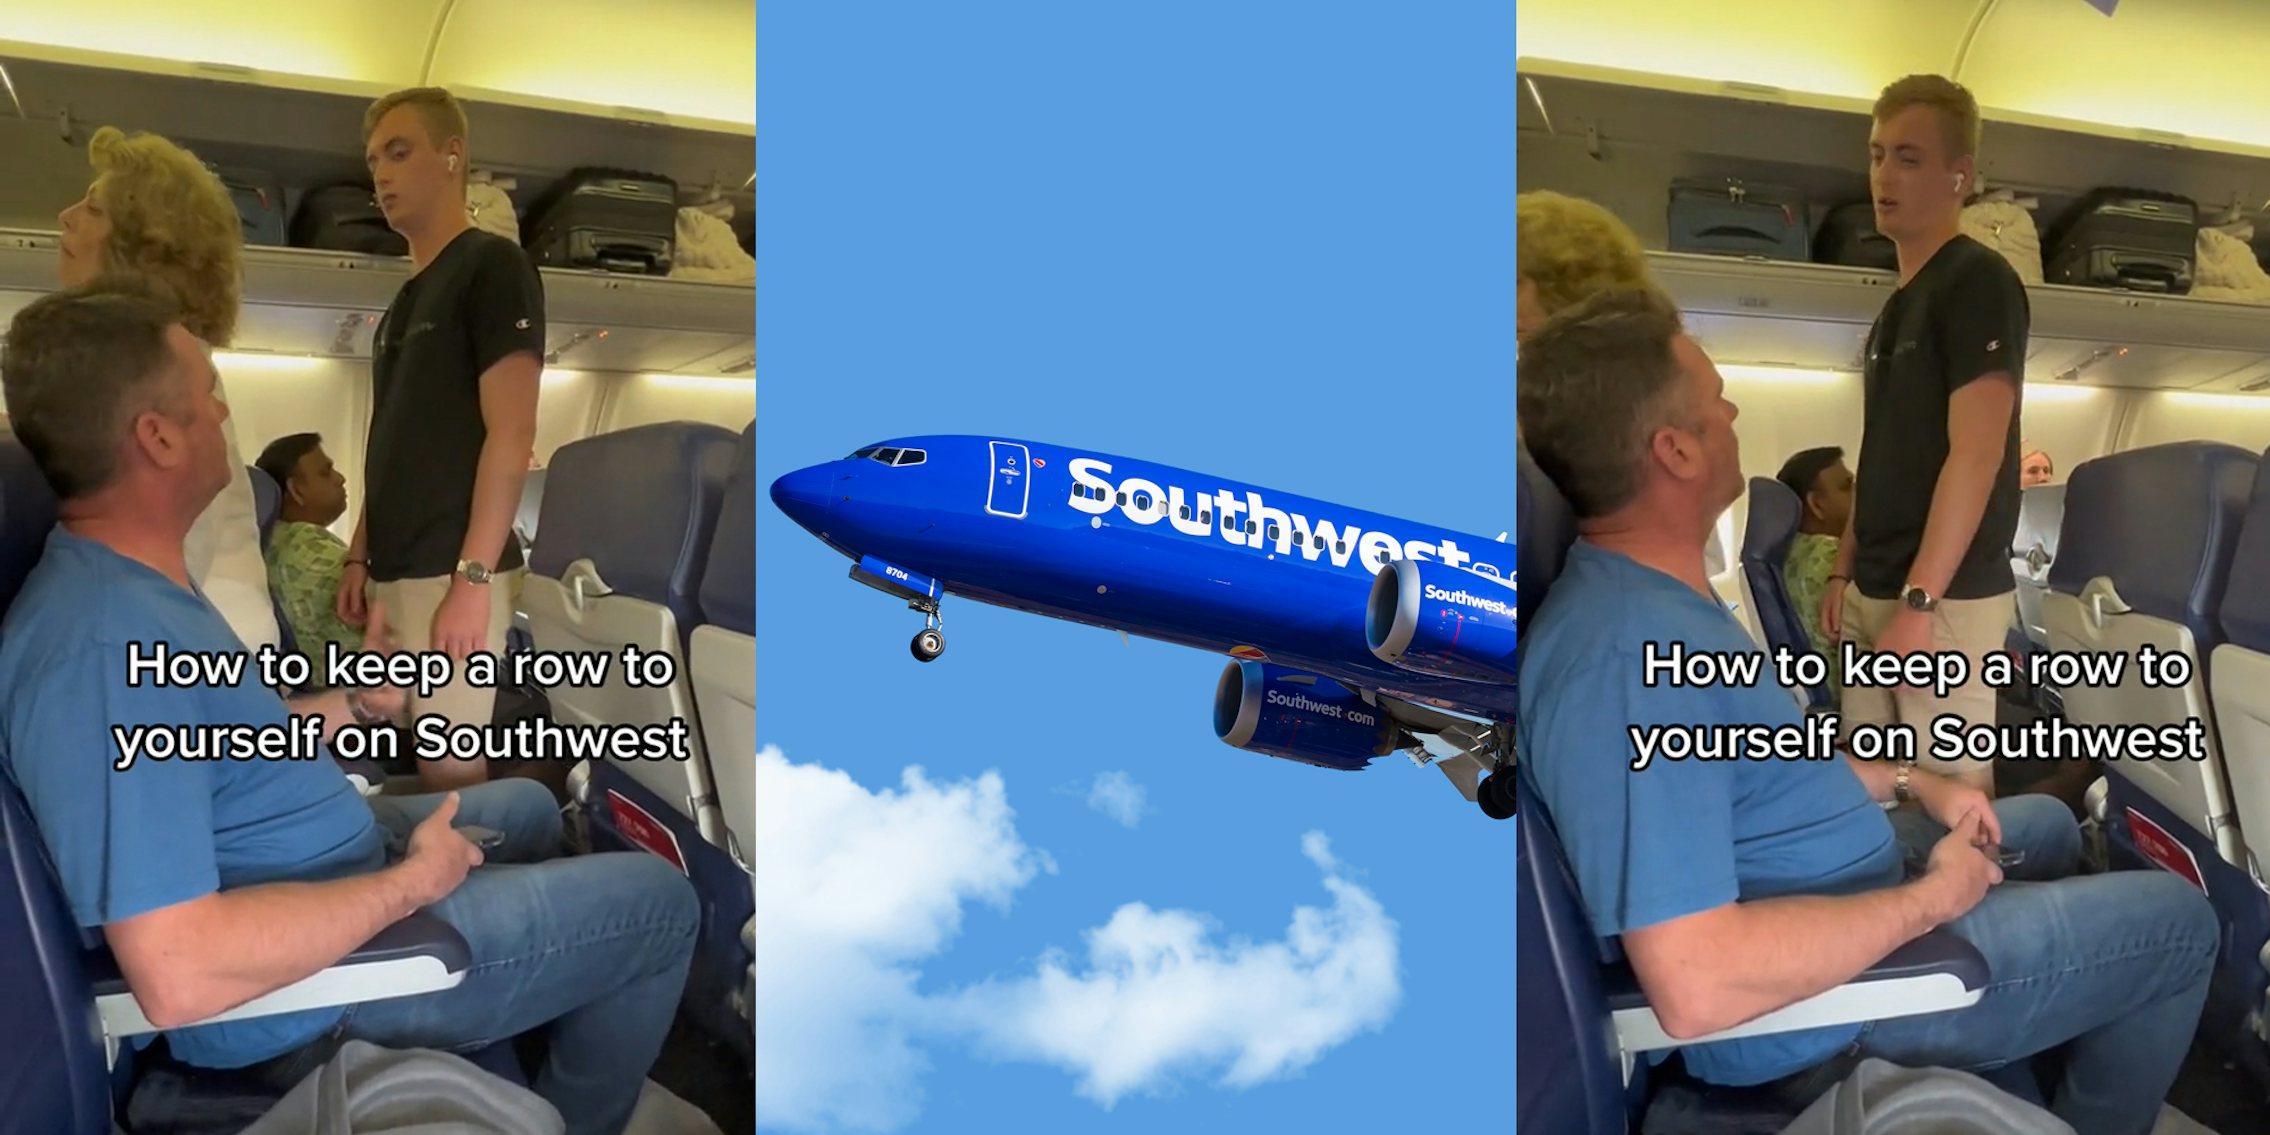 Southwest Airlines passengers on board with caption 'How to keep a row to yourself on Southwest' (l) Southwest Airlines plane in sky (c) Southwest Airlines passengers on board with caption 'How to keep a row to yourself on Southwest' (r)